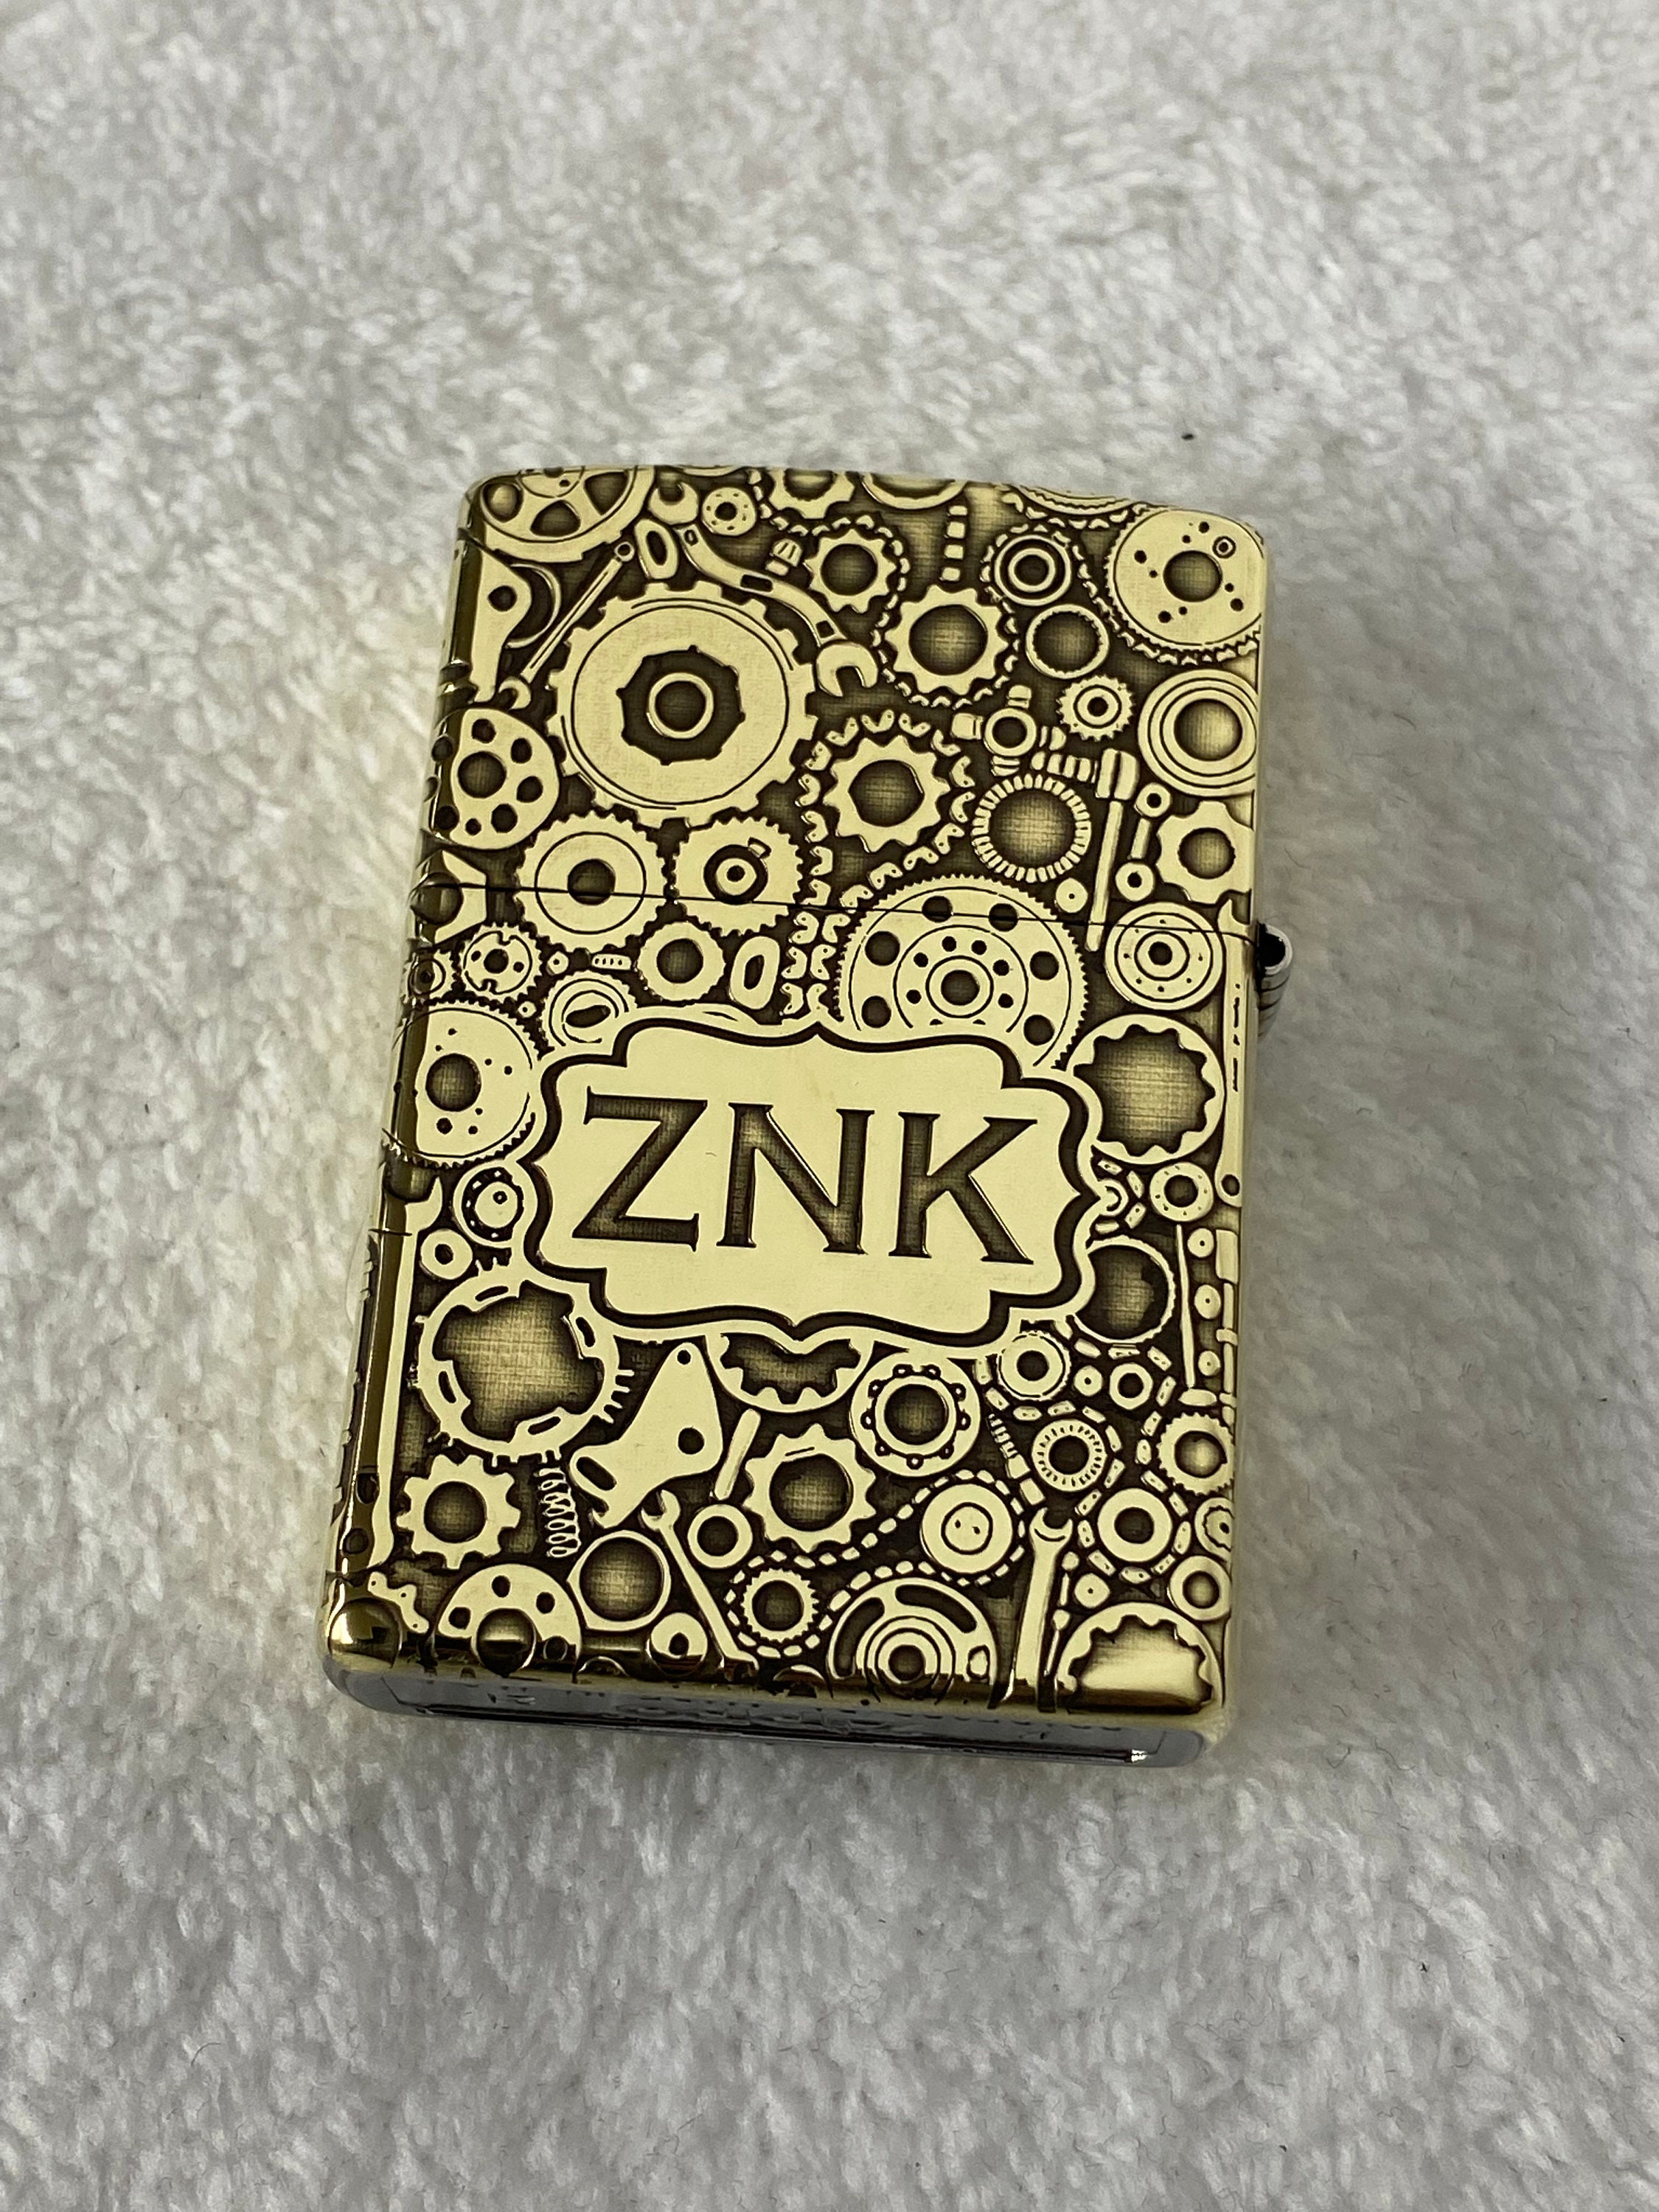 Custom Engraved Zippo Lighters, Military Tags, Pet IDs, Money Clips - Gifts  & Gadgets - Bessemer, AL